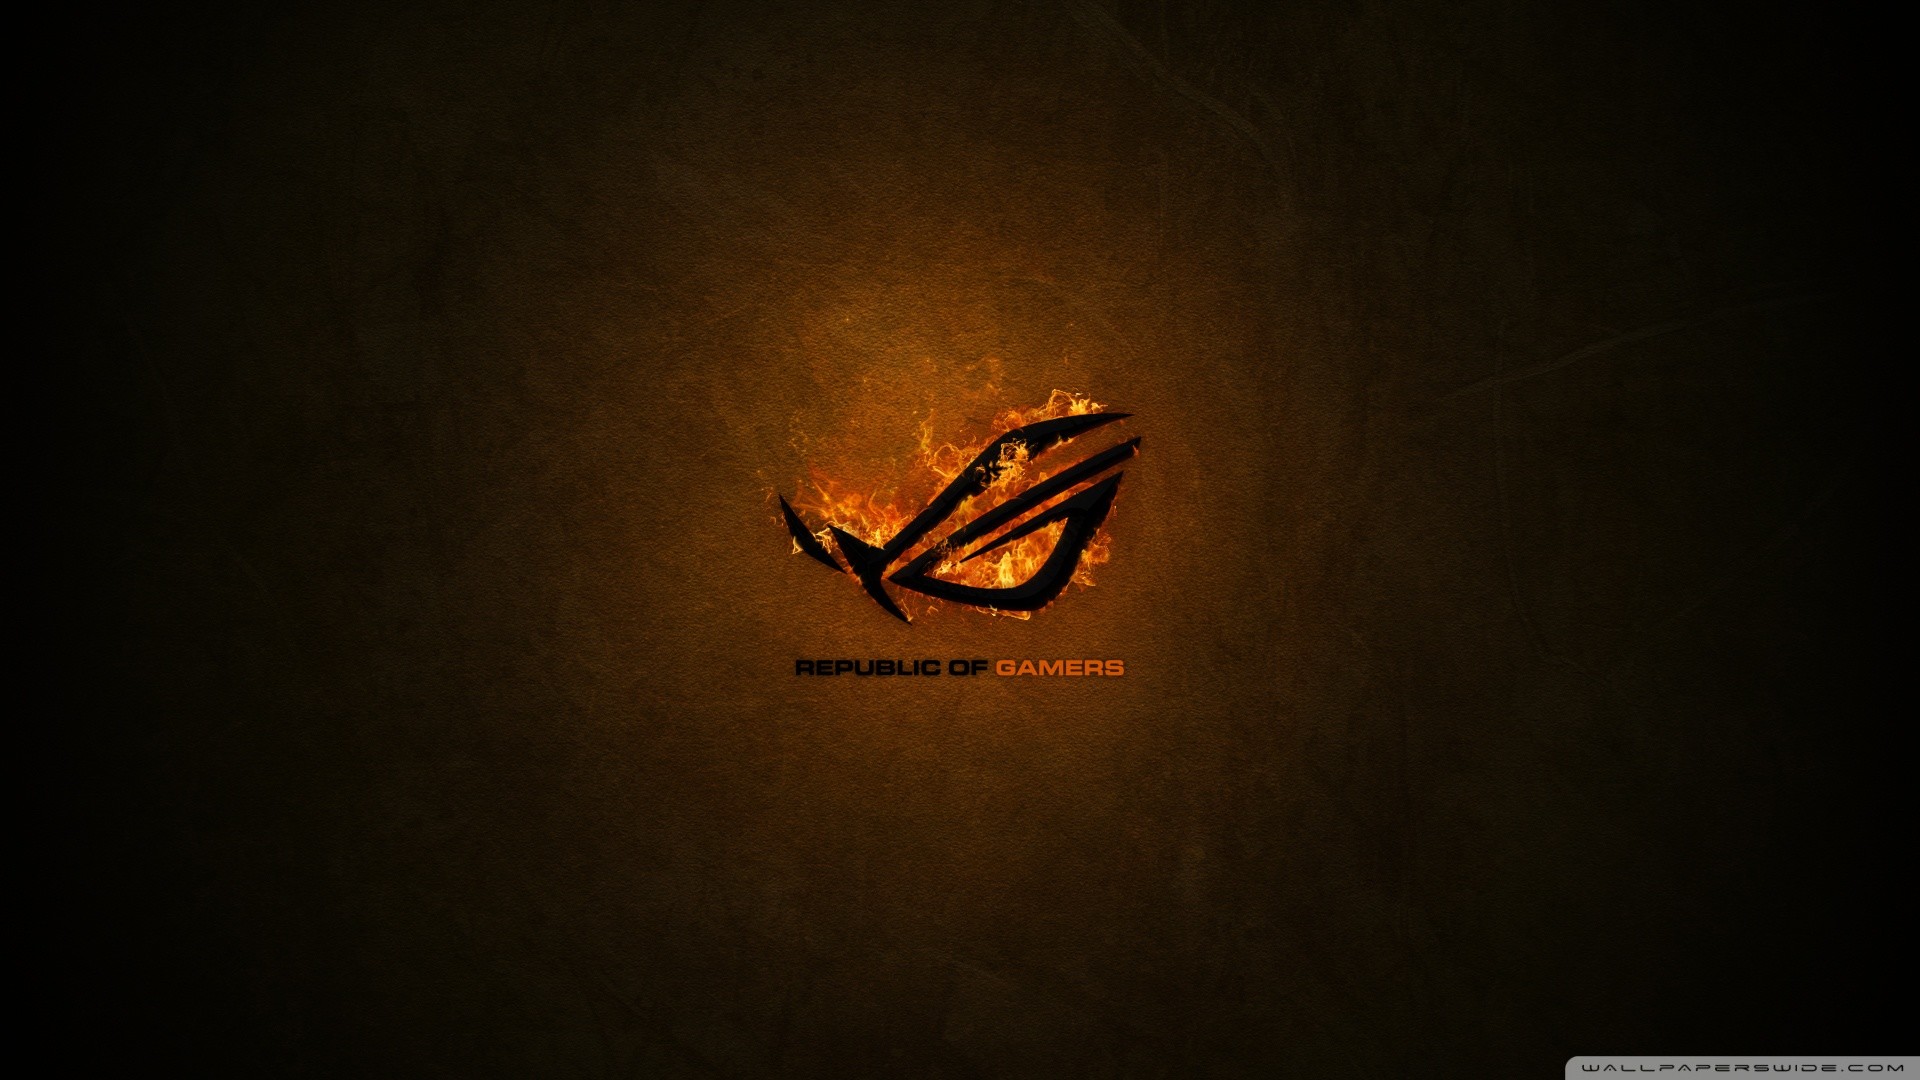 Asus Republic Of Gamers HD Wide Wallpaper for Widescreen